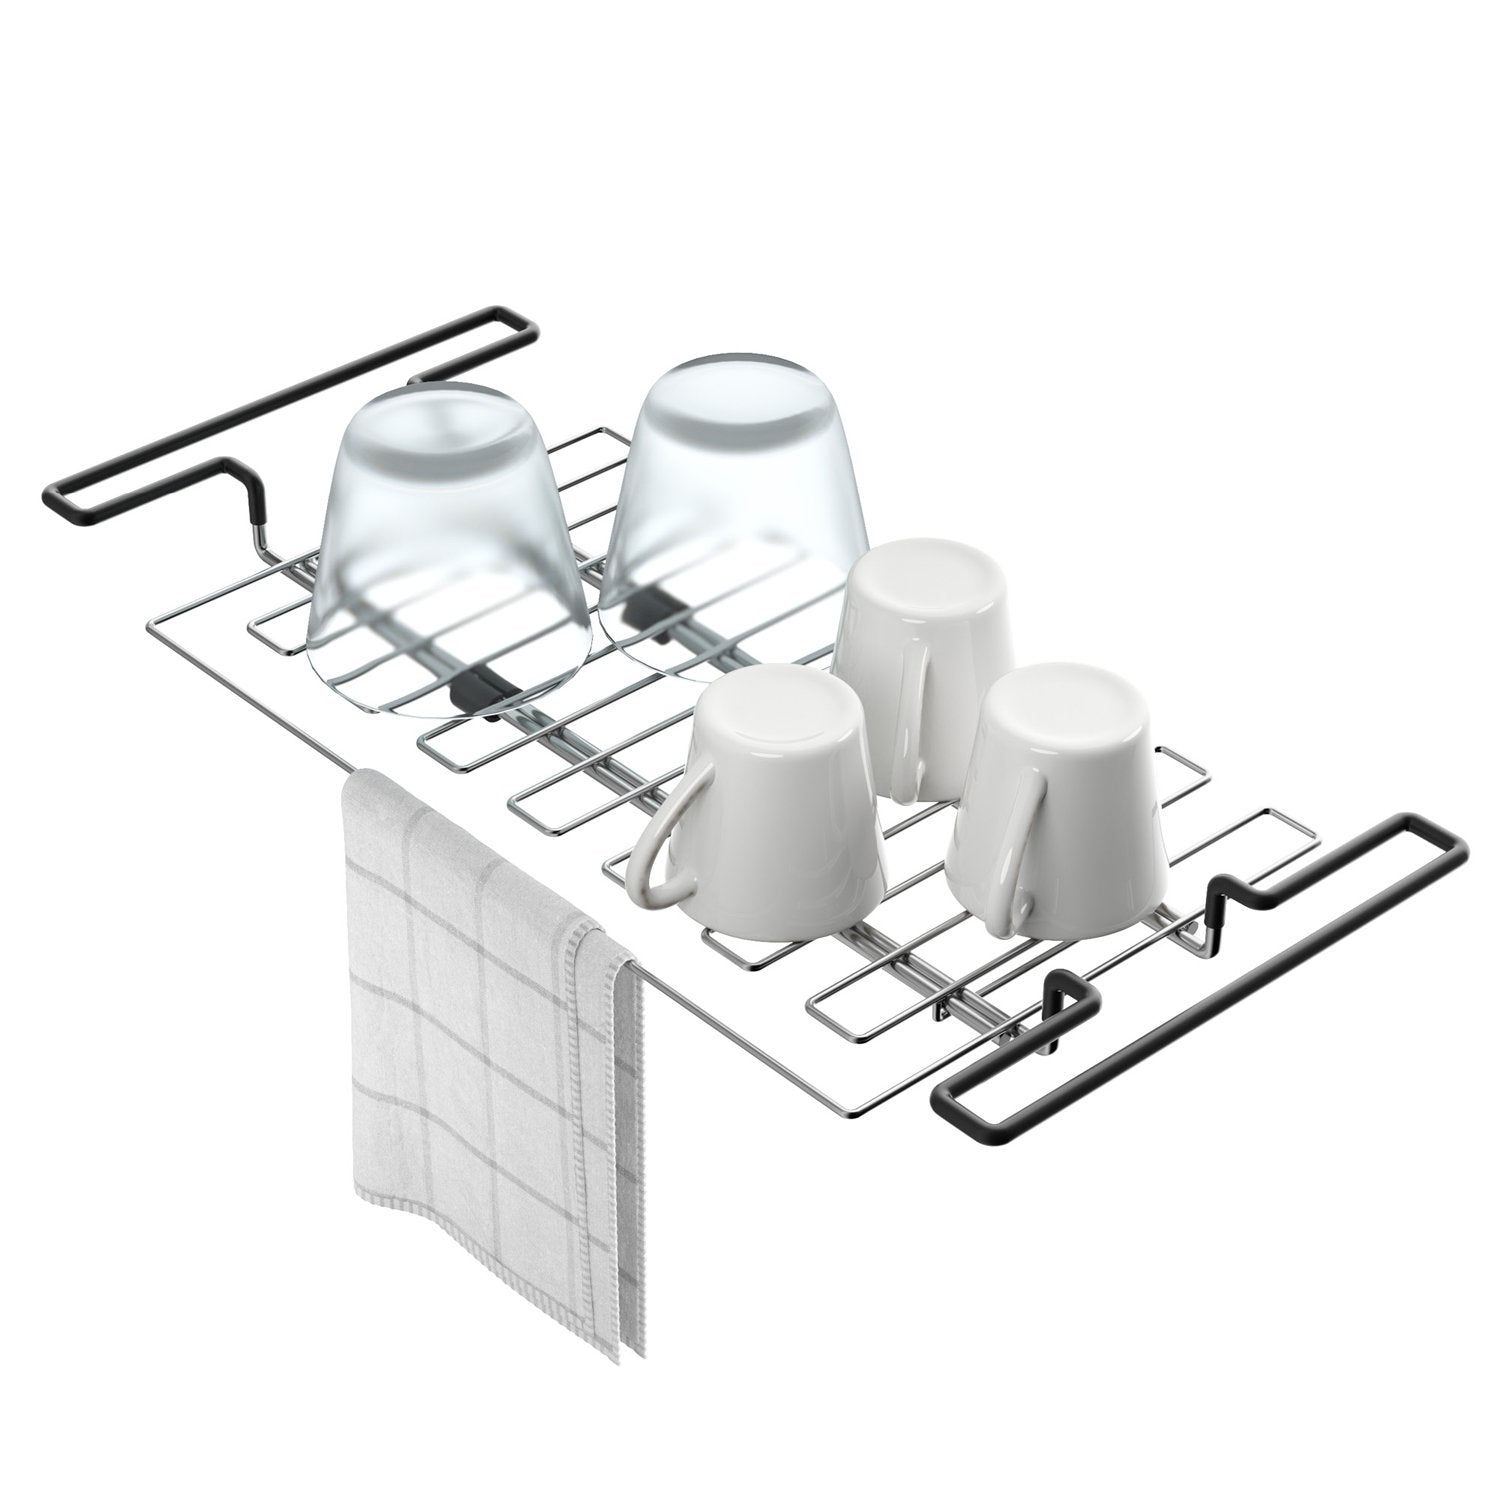 Kraus Multipurpose Stainless Steel Kitchen Sink Drying Rack, Sponge Holder,  Sink Caddy with Towel Bar, Expandable 15 7/8 in. to 18 7/8 in., KCD-1